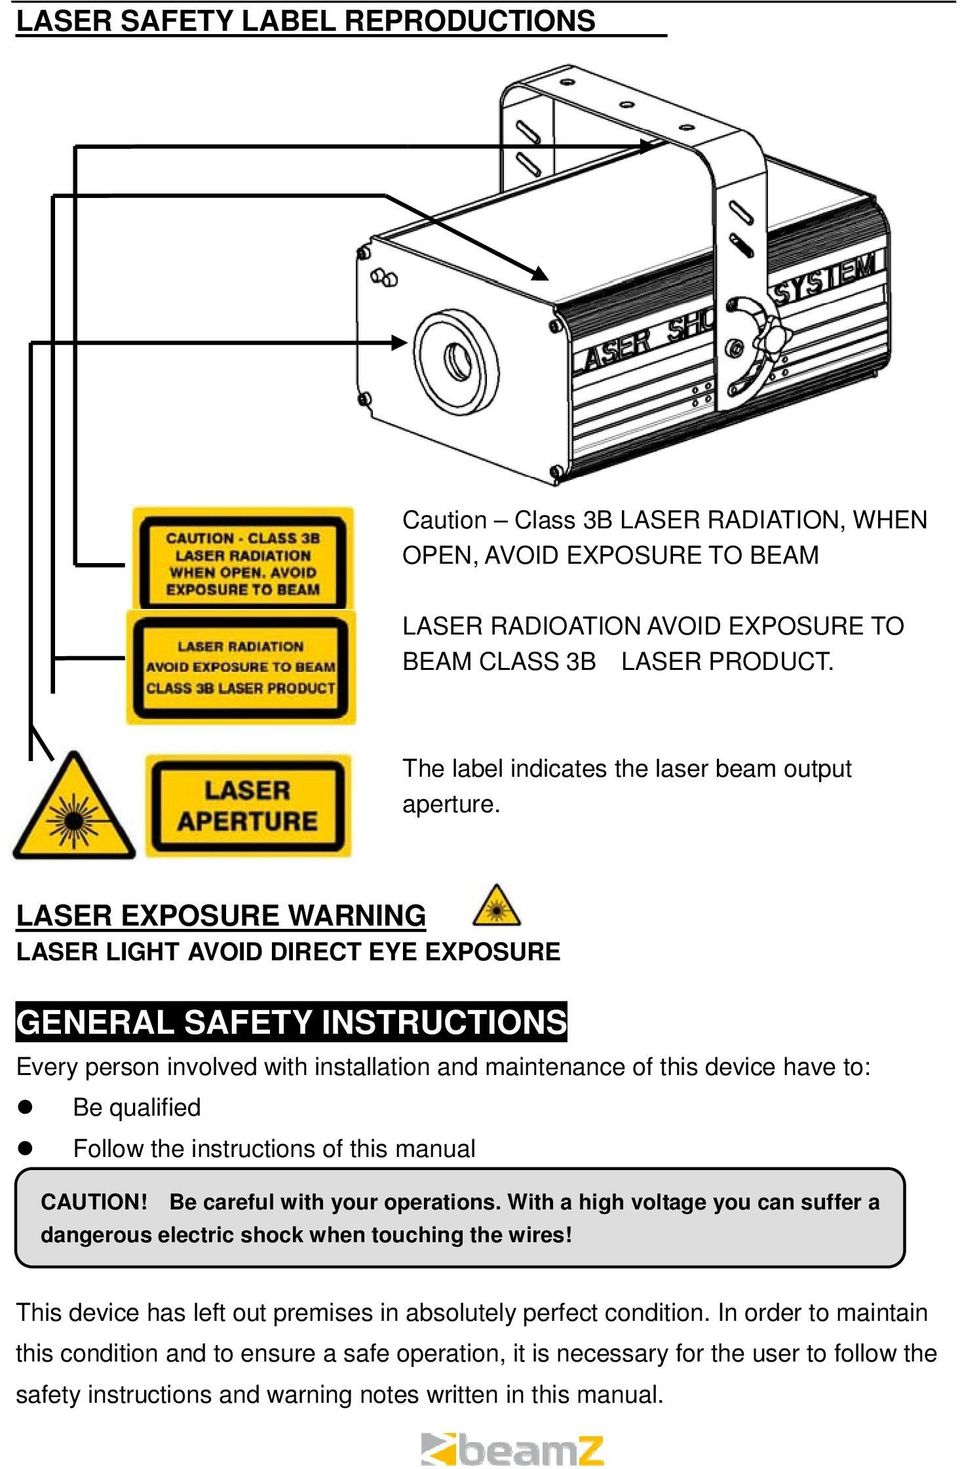 LASER EXPOSURE WARNING LASER LIGHT AVOID DIRECT EYE EXPOSURE GENERAL SAFETY INSTRUCTIONS Every person involved with installation and maintenance of this device have to: Be qualified Follow the